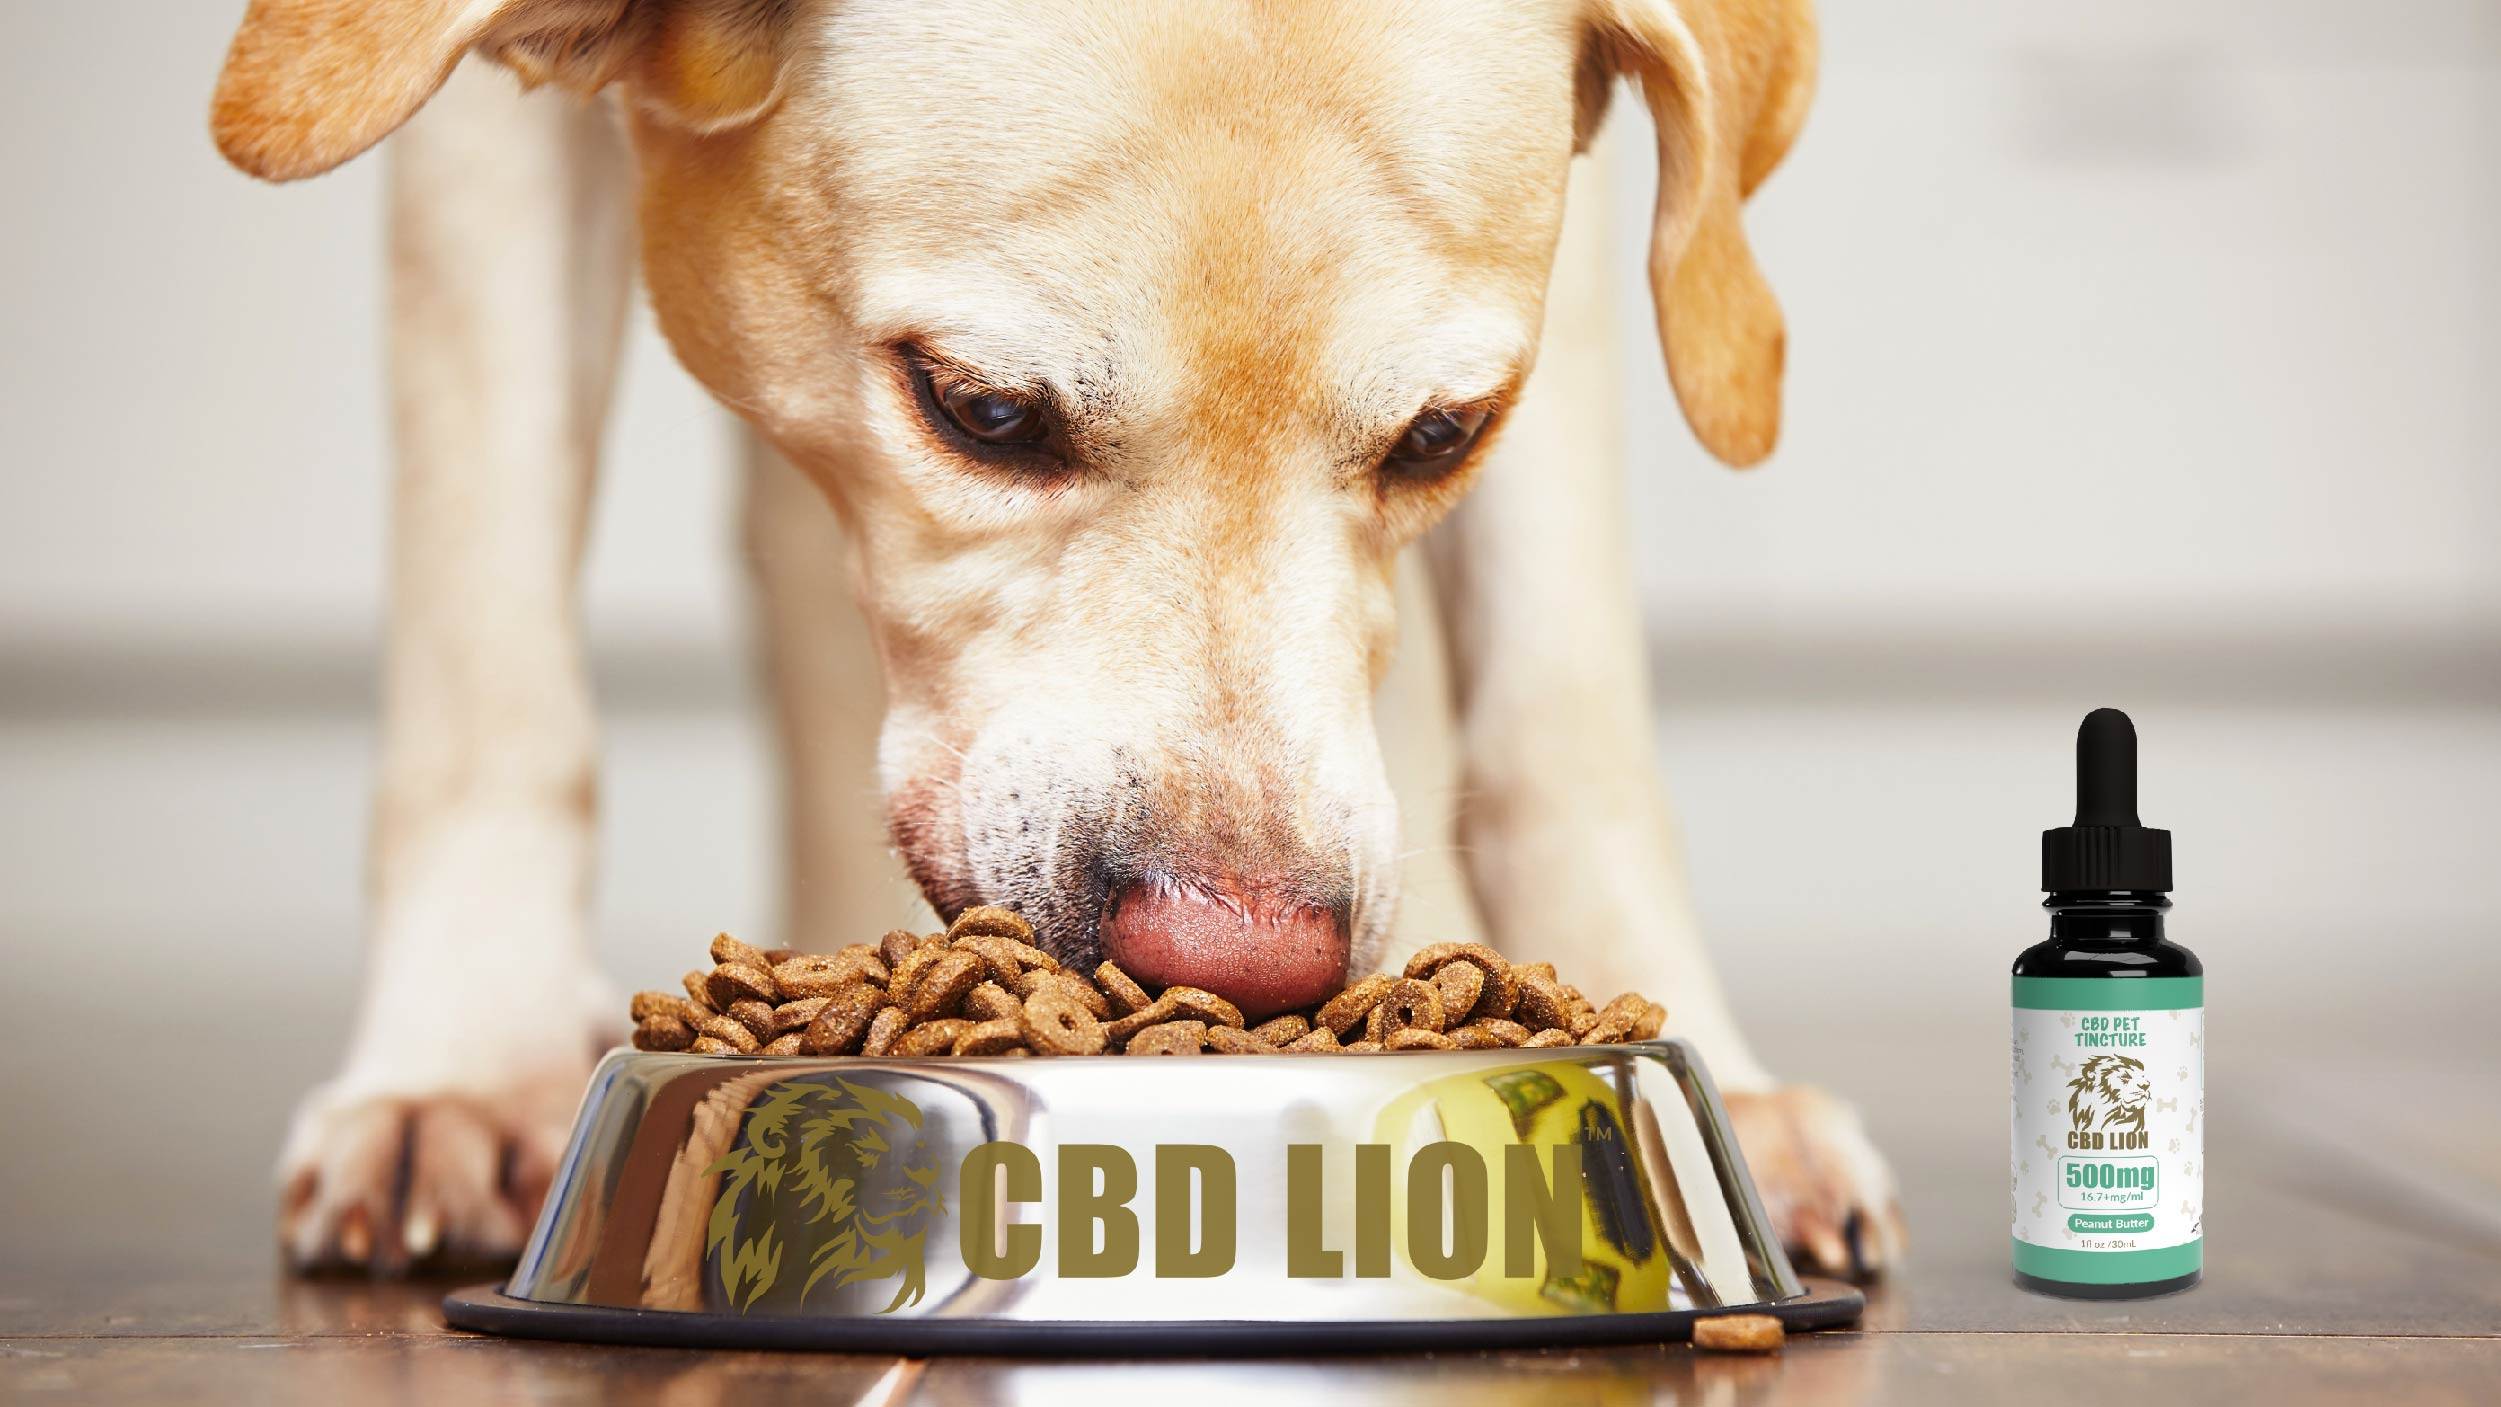 Using CBD to help dog's pain and anxiety